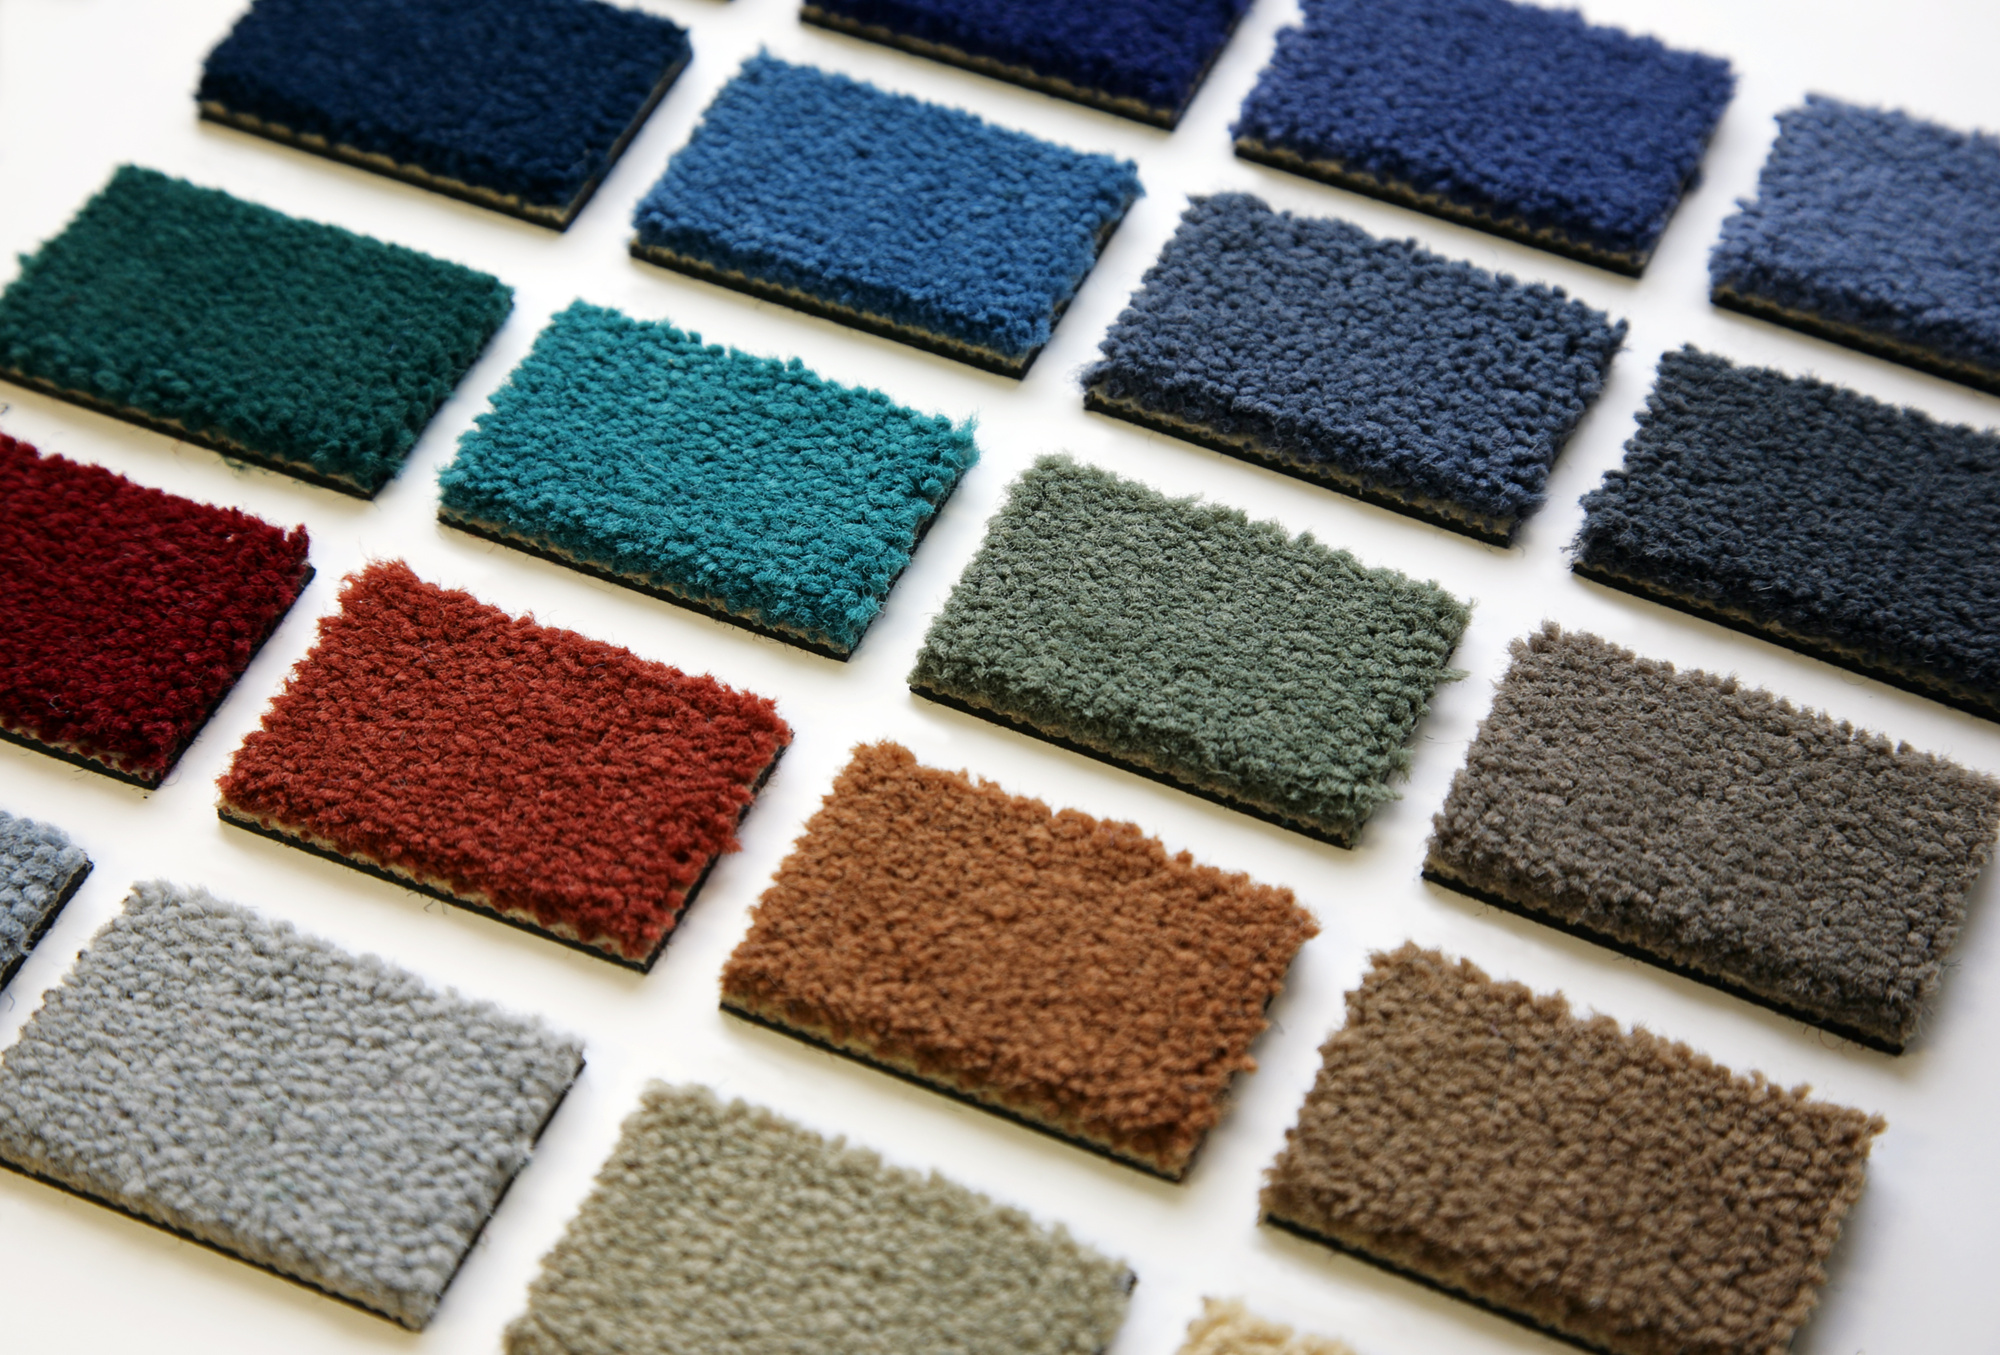 Selecting Carpet Color and Pattern